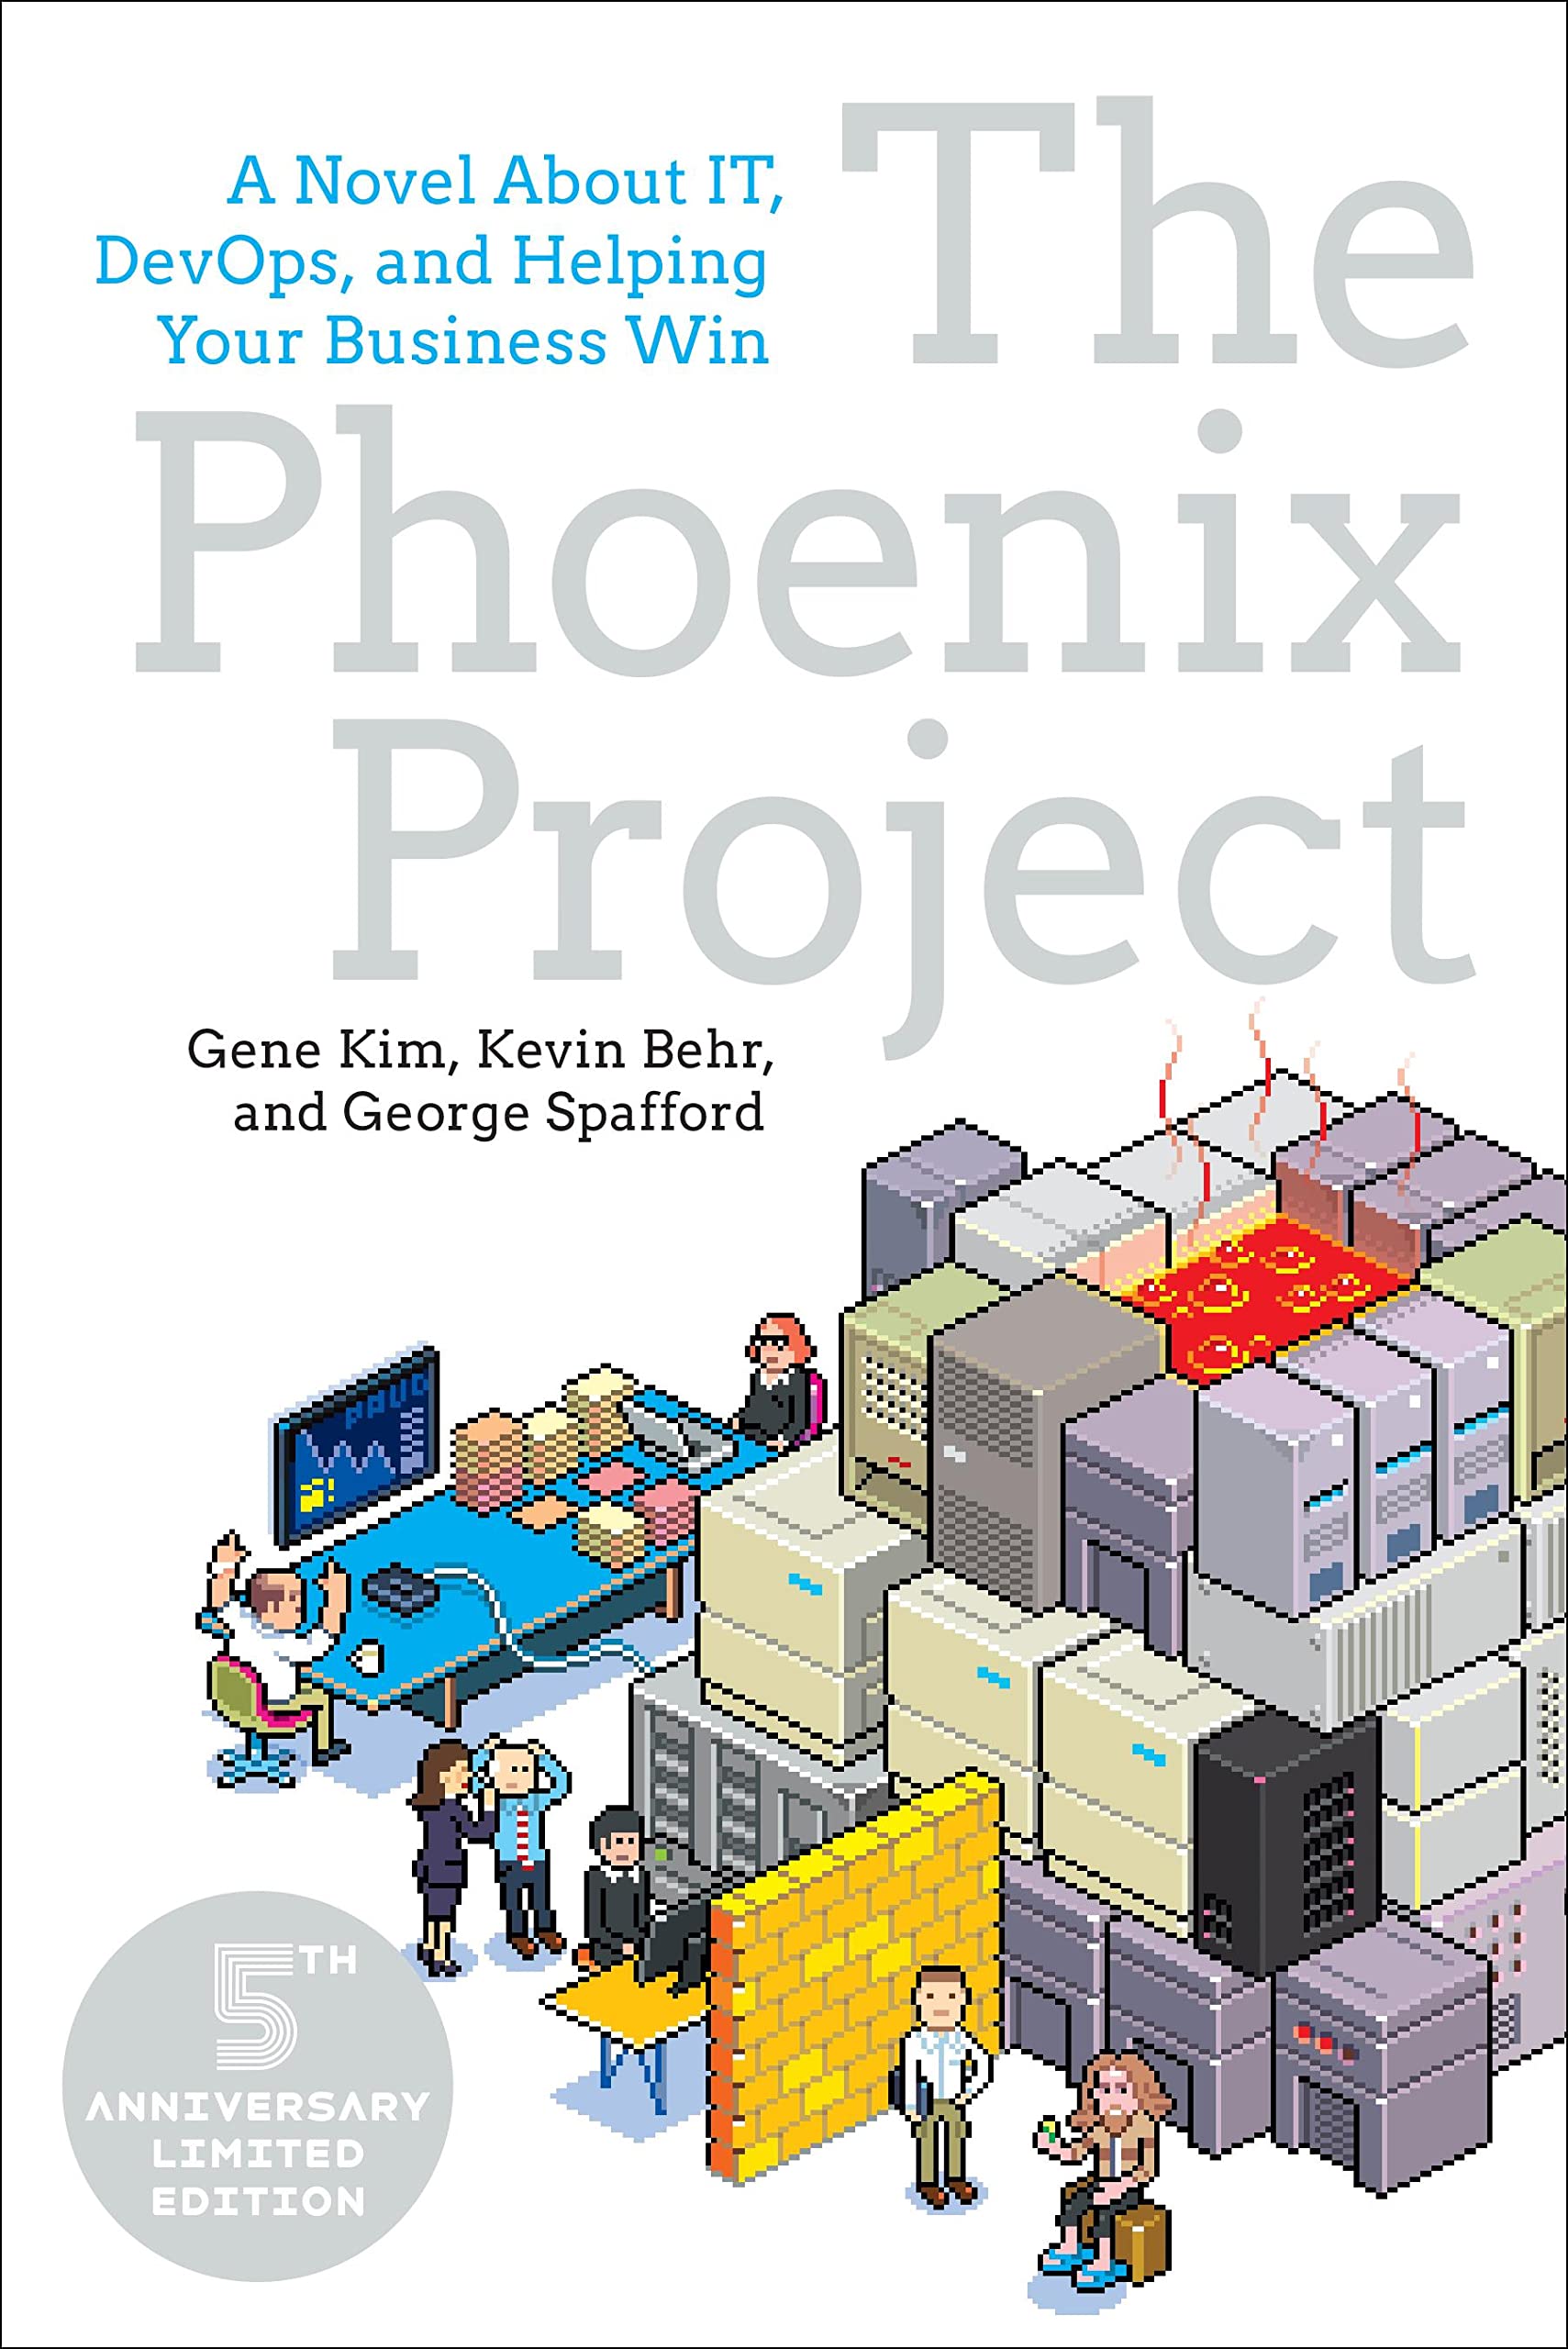 Book Cover of “The Phoenix Project”